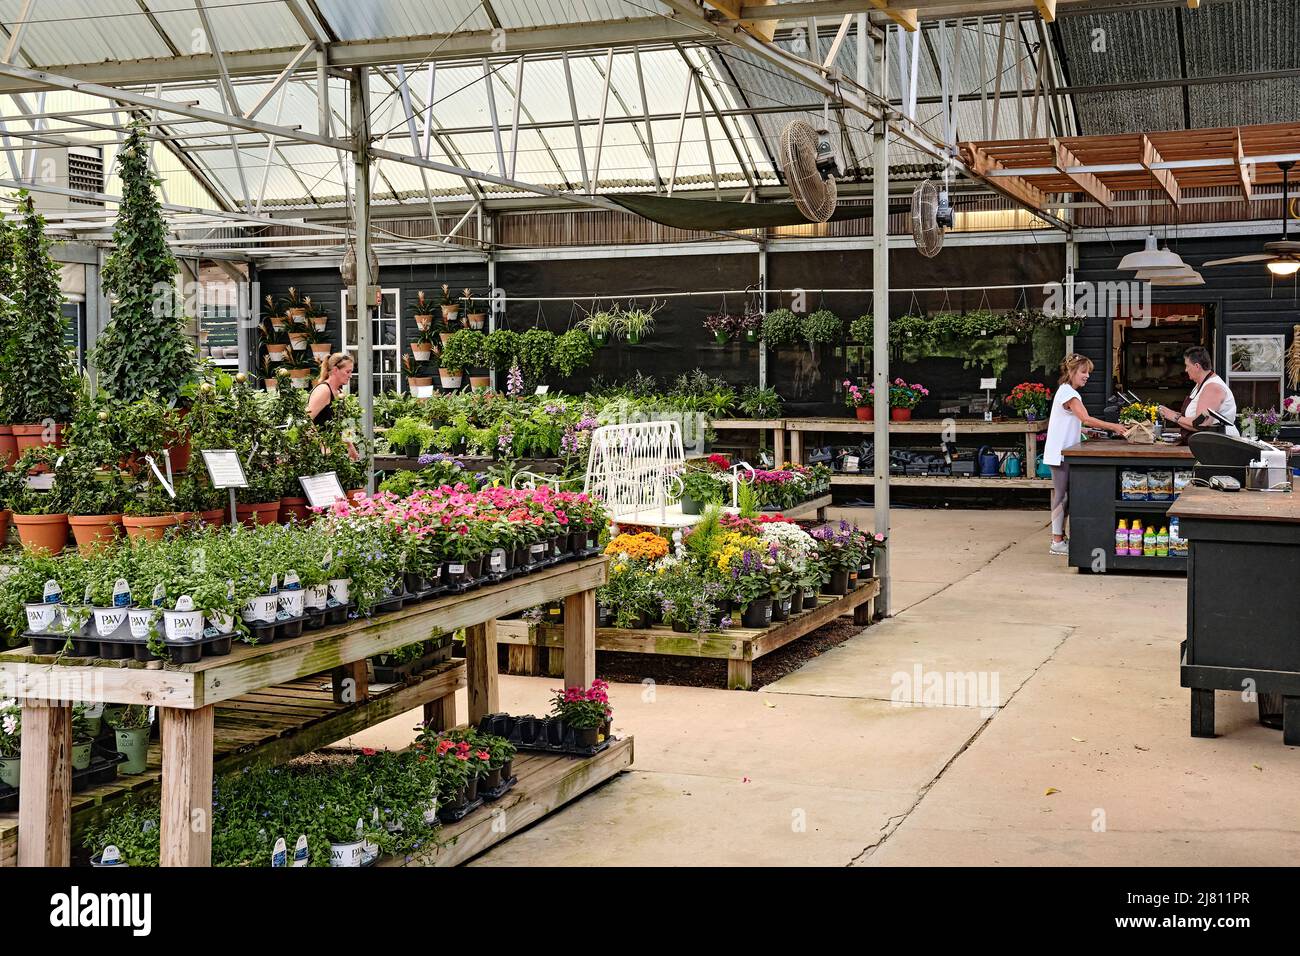 Woman shopping and woman buying at a plant nursery or garden center in Birmingham Alabama, USA. Stock Photo